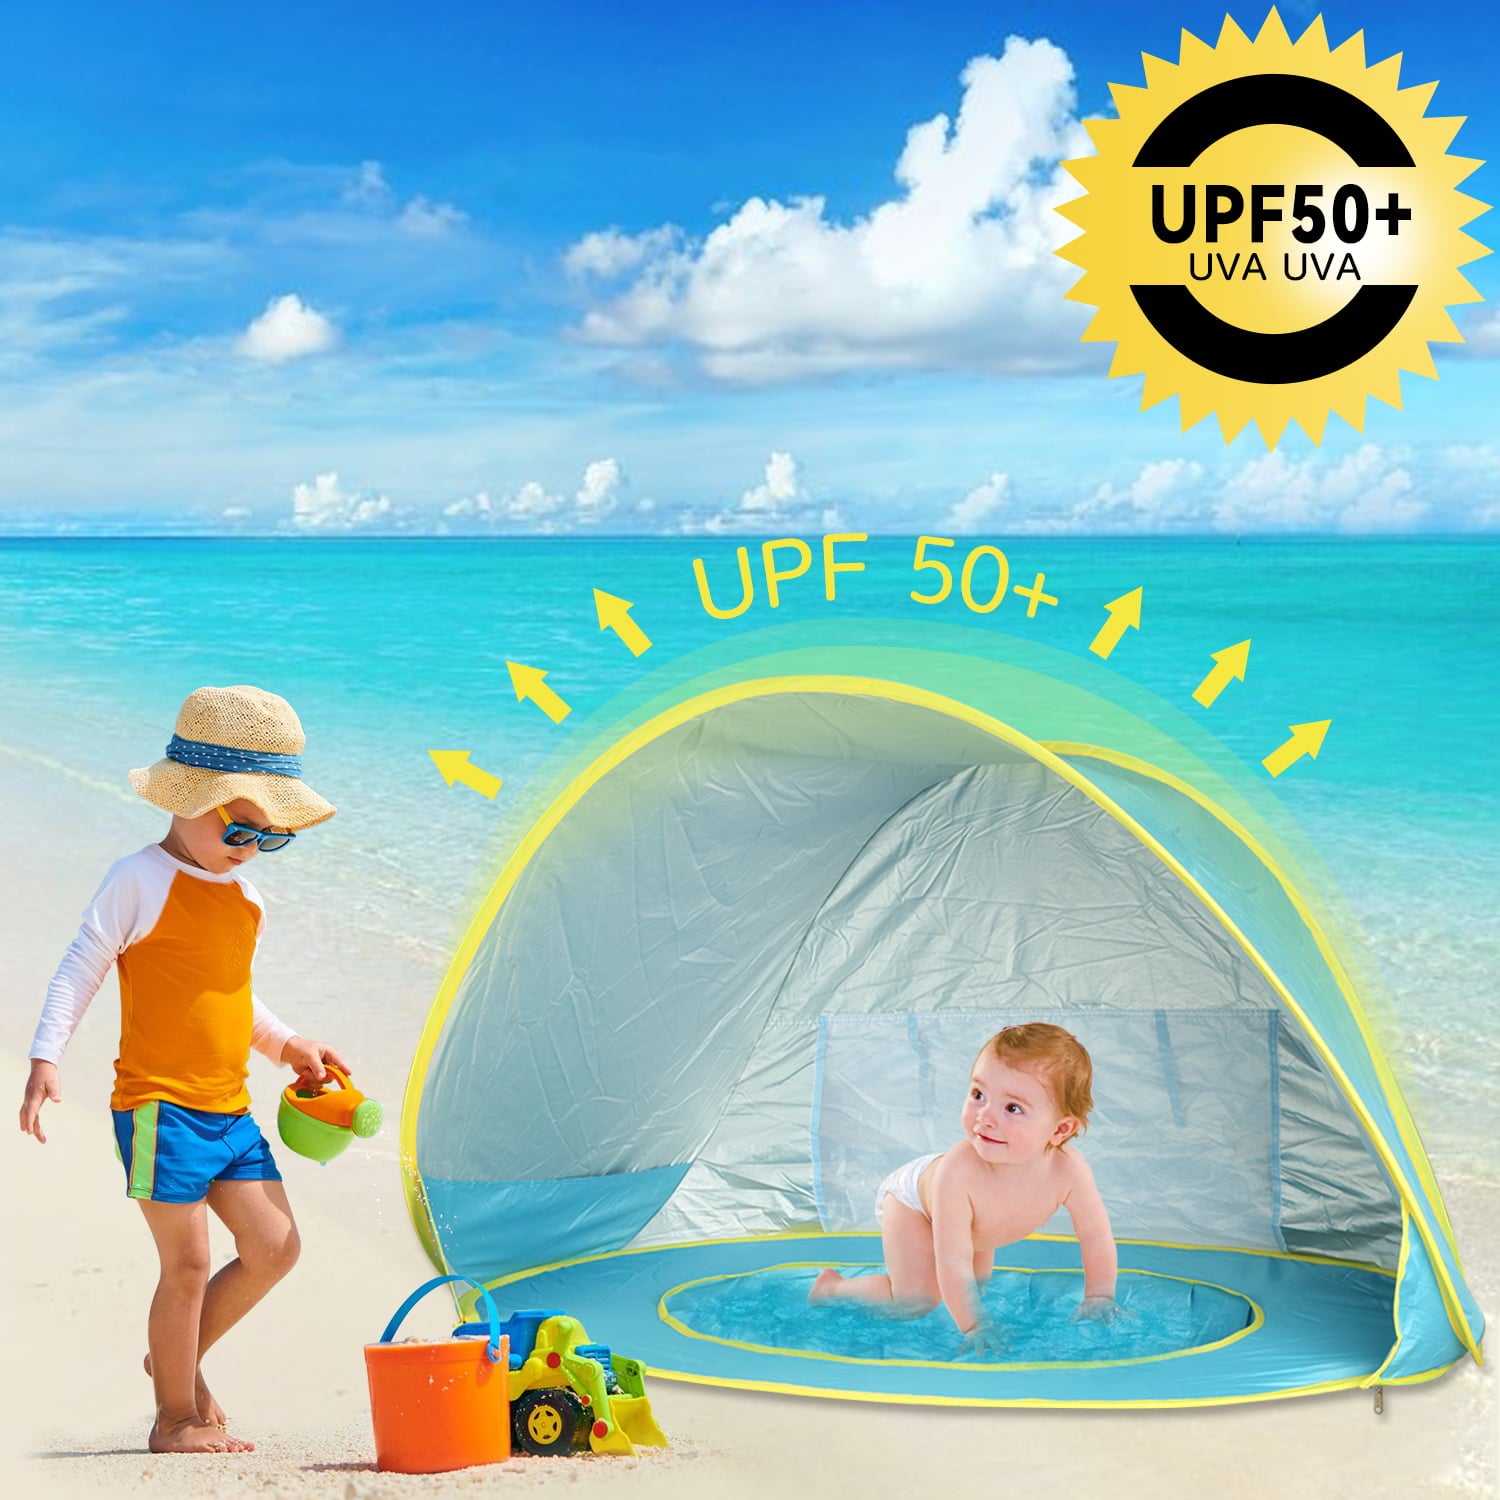 DOTSOG Baby Beach Tent Pop Up Portable Shade Pool UPF 50+ Protection Sun Shelter Beach Umbrella for Infant Beach Camping Fishing Hiking Blue